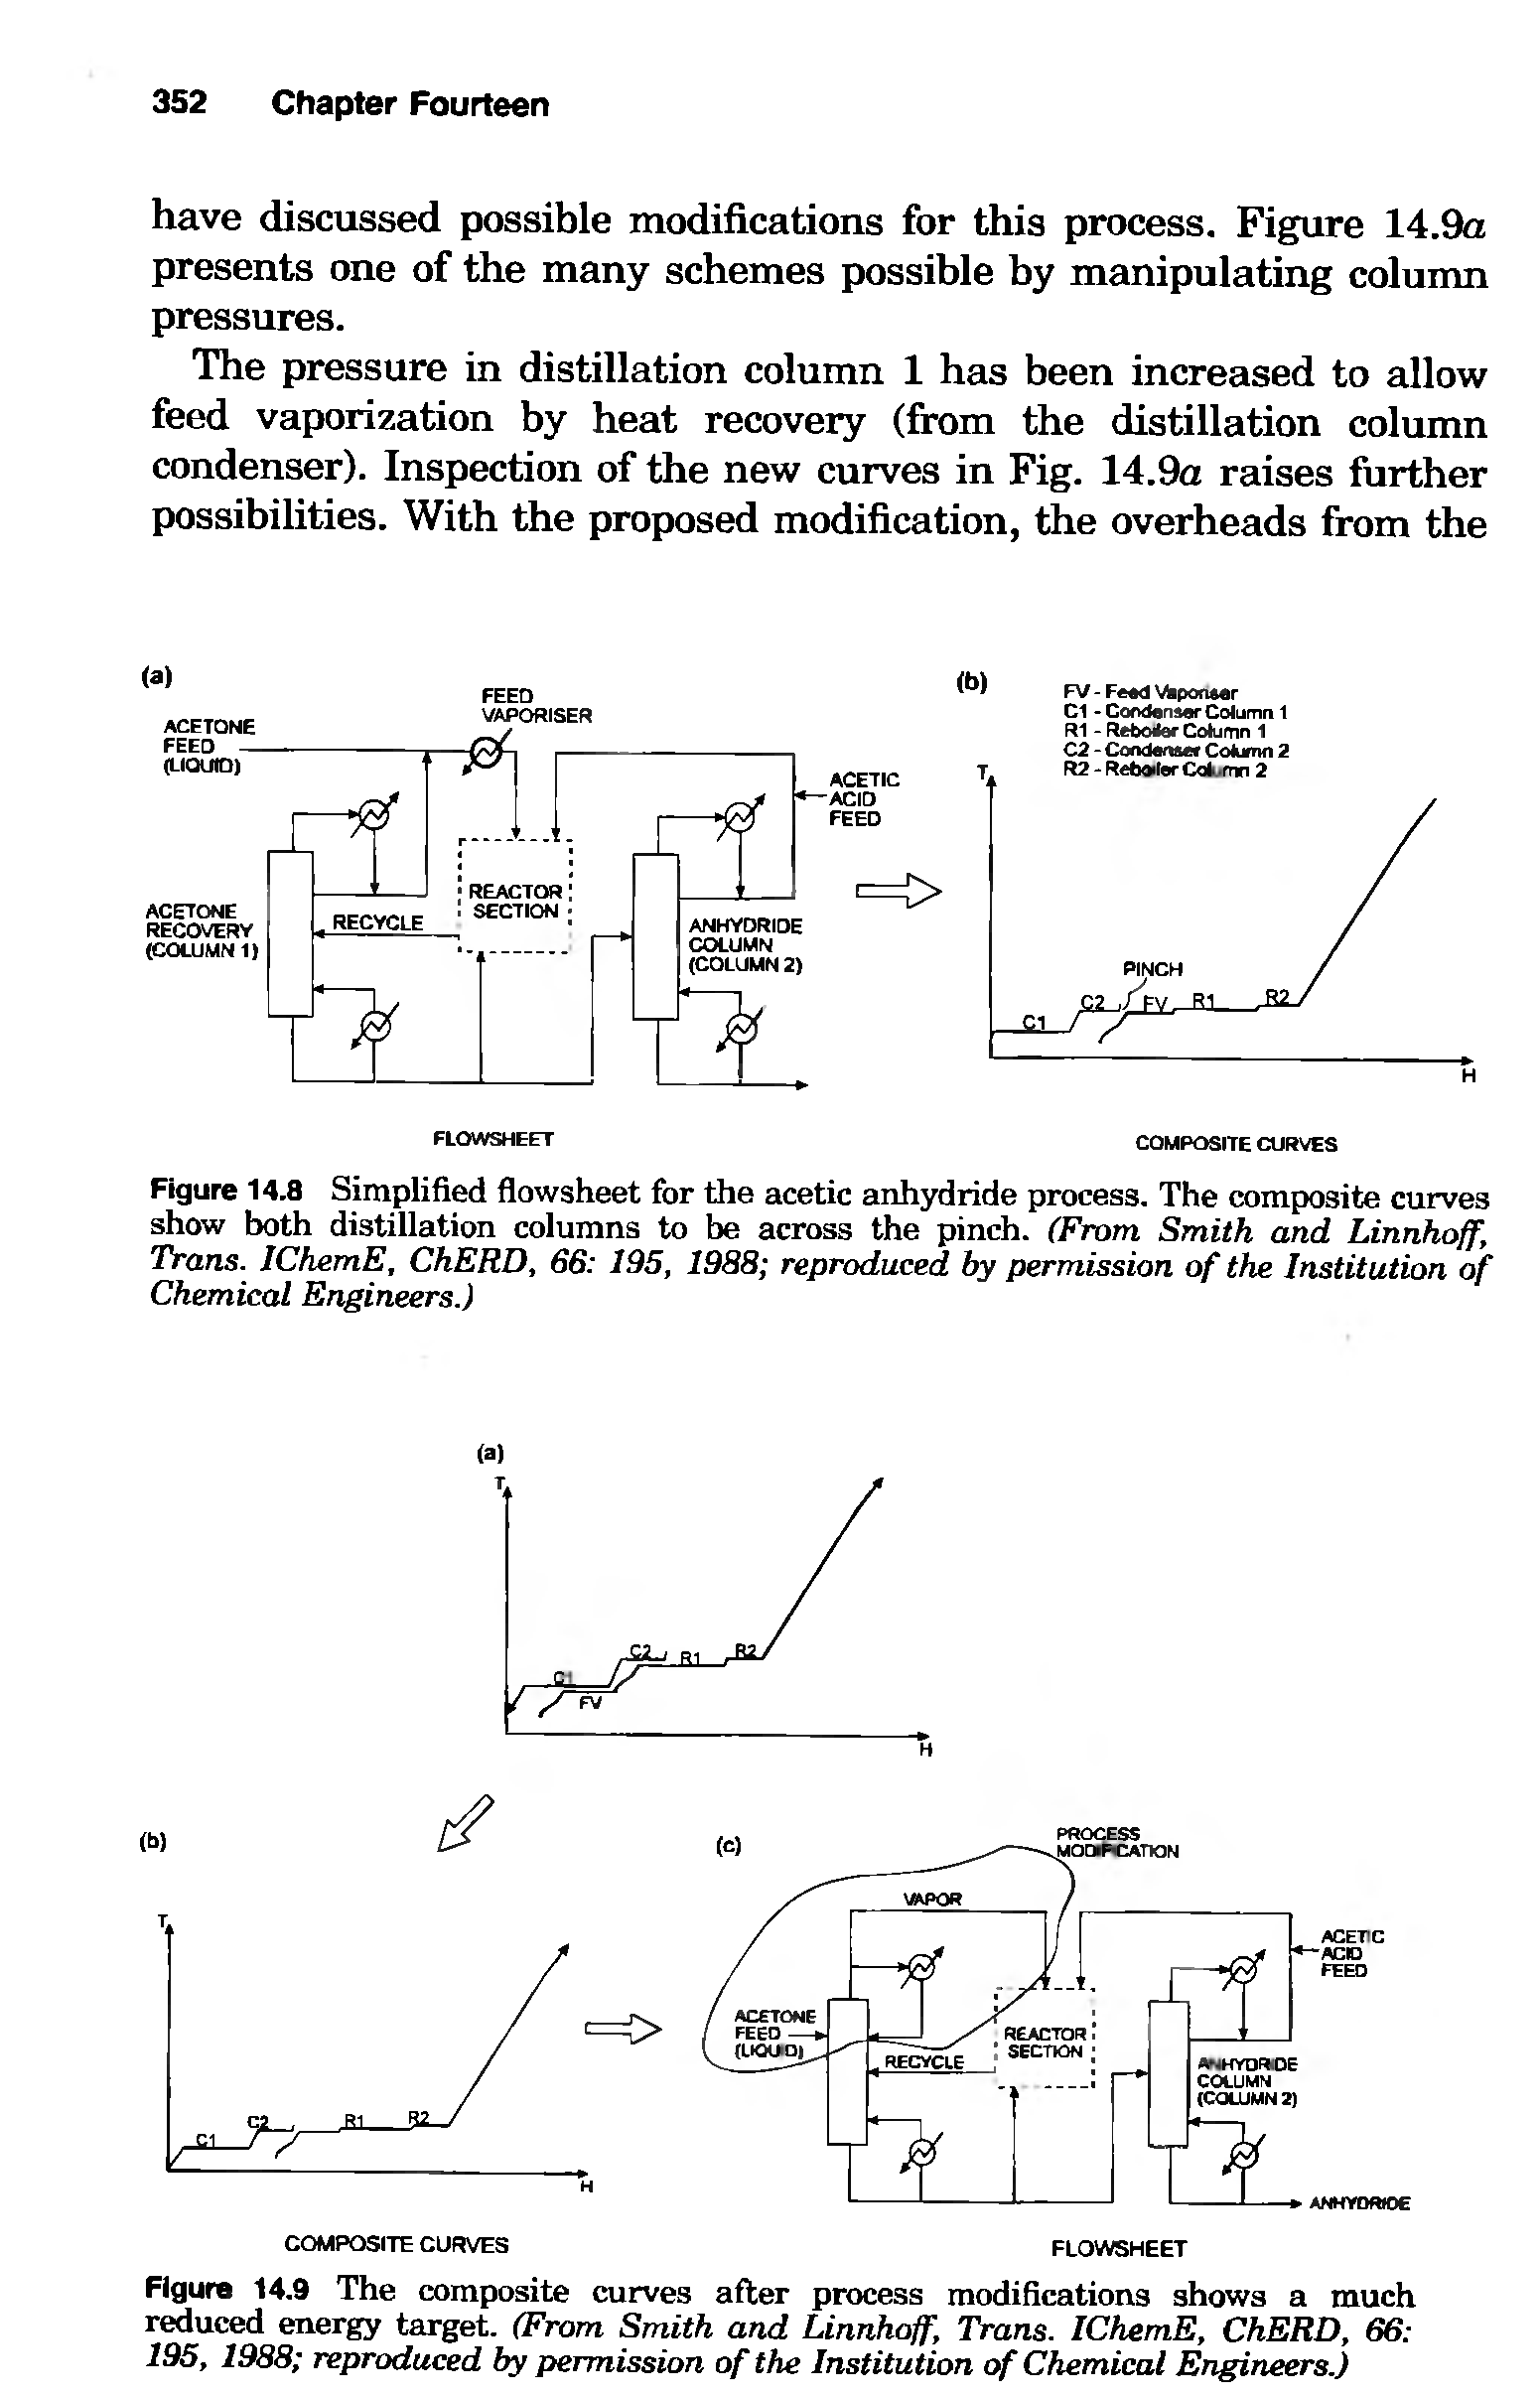 Figure 14.8 Simplified fiowsheet for the acetic anhydride process. The composite curves show both distillation columns to be across the pinch. (From Smith and Linnhoff, Trans. IChemE, ChERD, 66 195, 1988 reproduxxd by permission of the Institution of Chemical Engineers.)...